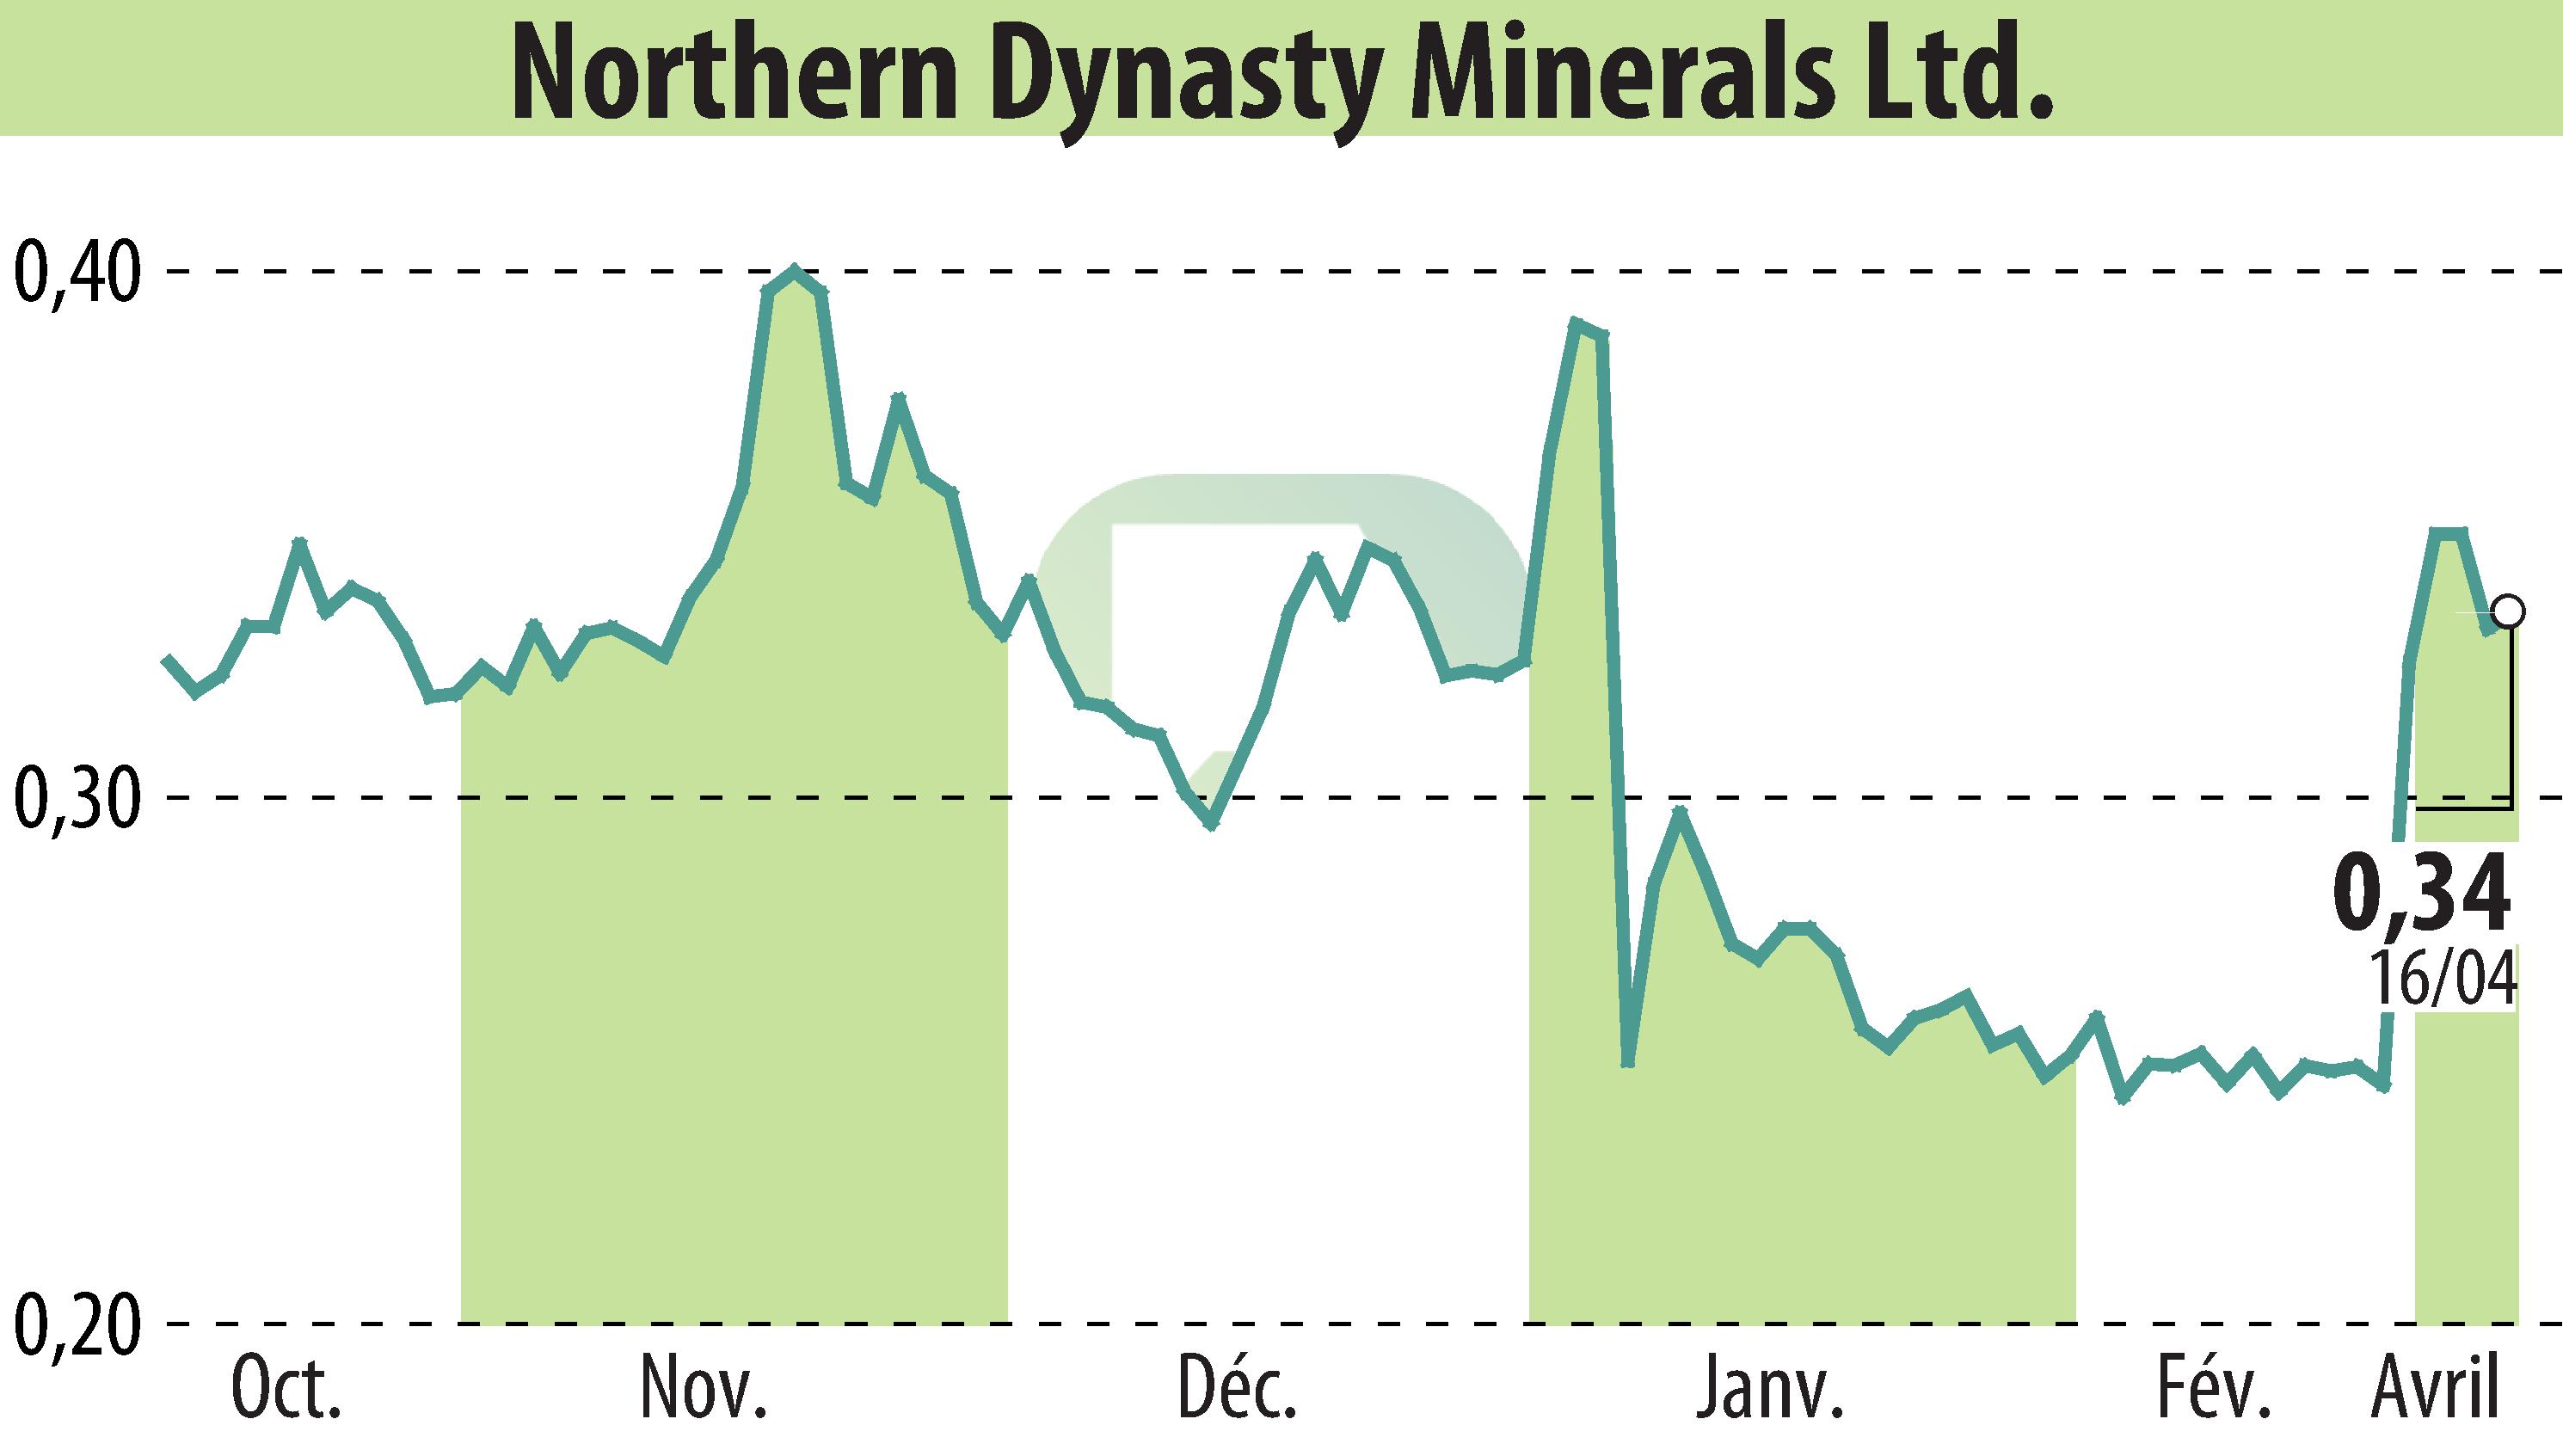 Stock price chart of Northern Dynasty Minerals Ltd. (EBR:NAK) showing fluctuations.